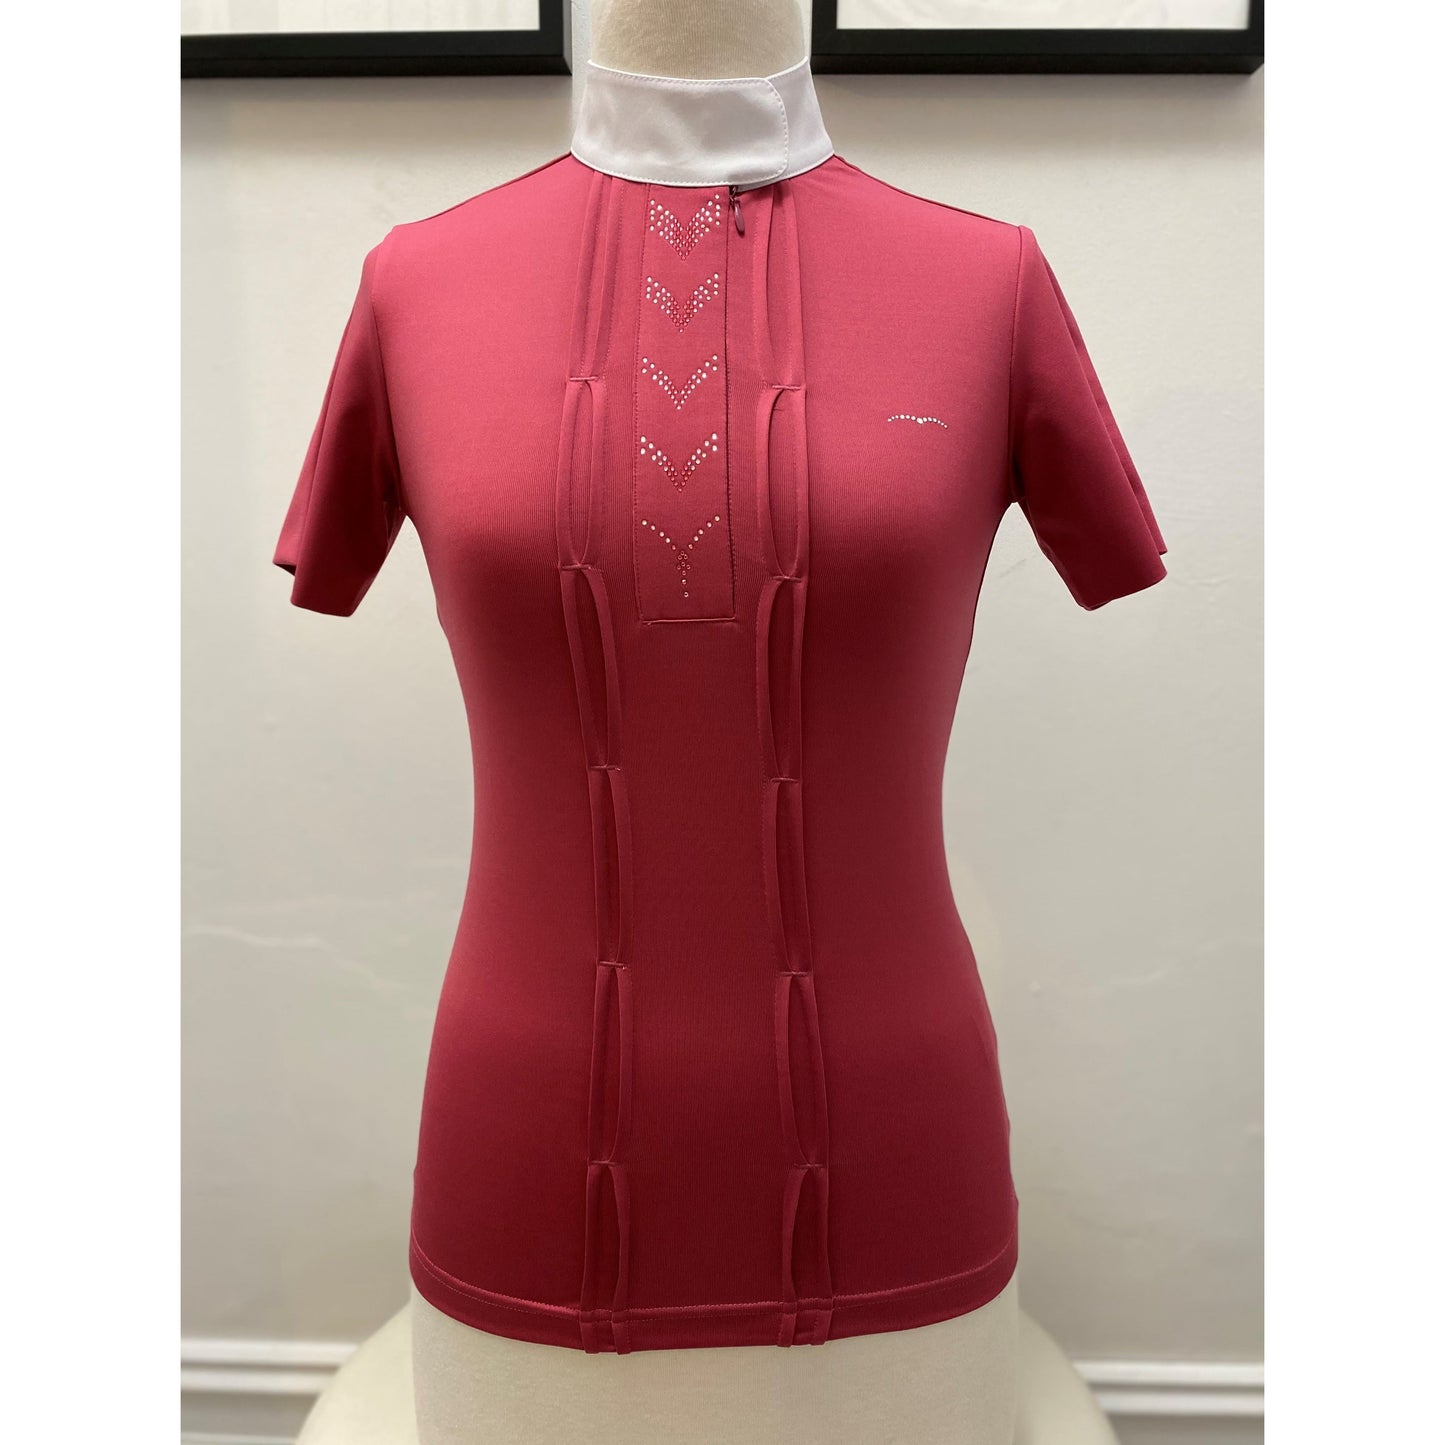 Animo brand short-sleeved pink equestrian show shirt on mannequin.